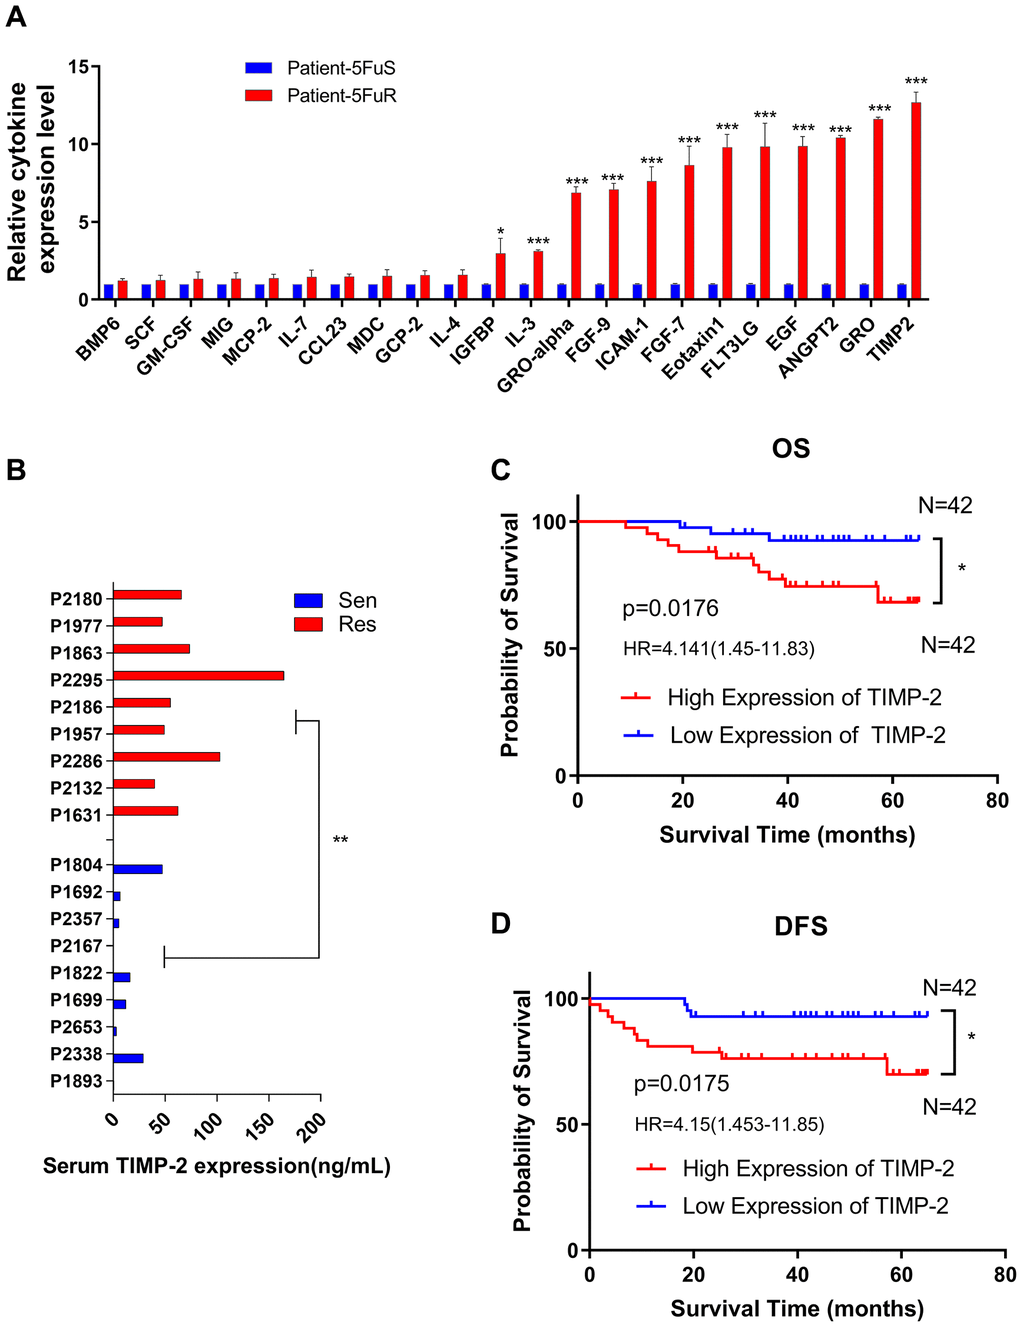 TIMP-2 is elevated in 5-Fu resistant CRC patients and predicts clinical outcomes. (A) Relative cytokine expression levels in the serum of 5-Fu sensitive and resistant patients. Patient details are shown in Table 1. Sen, sensitive patients. Res, resistant patients. (B) Differences in TIMP-2 protein expression levels in non-resistant (n = 9) and resistant patients (n = 9) with colorectal cancer. Patient details are shown in Table 2. Sen, sensitive patients. Res, resistant patients. (C) 6-year OS Kaplan–Meier survival curves for 84 colorectal cancer patients, differential grouping based on TIMP-2 expression (36.6 ng/ml) in serum. Table 3 shows patient information. (D) 6-year DFS Kaplan–Meier survival curves for 84 colorectal cancer patients, differential grouping based on TIMP-2 expression (36.6 ng/ml) in serum. Table 3 shows patient information. (A, B) *p **p ***p t-test. (C, D) *p 